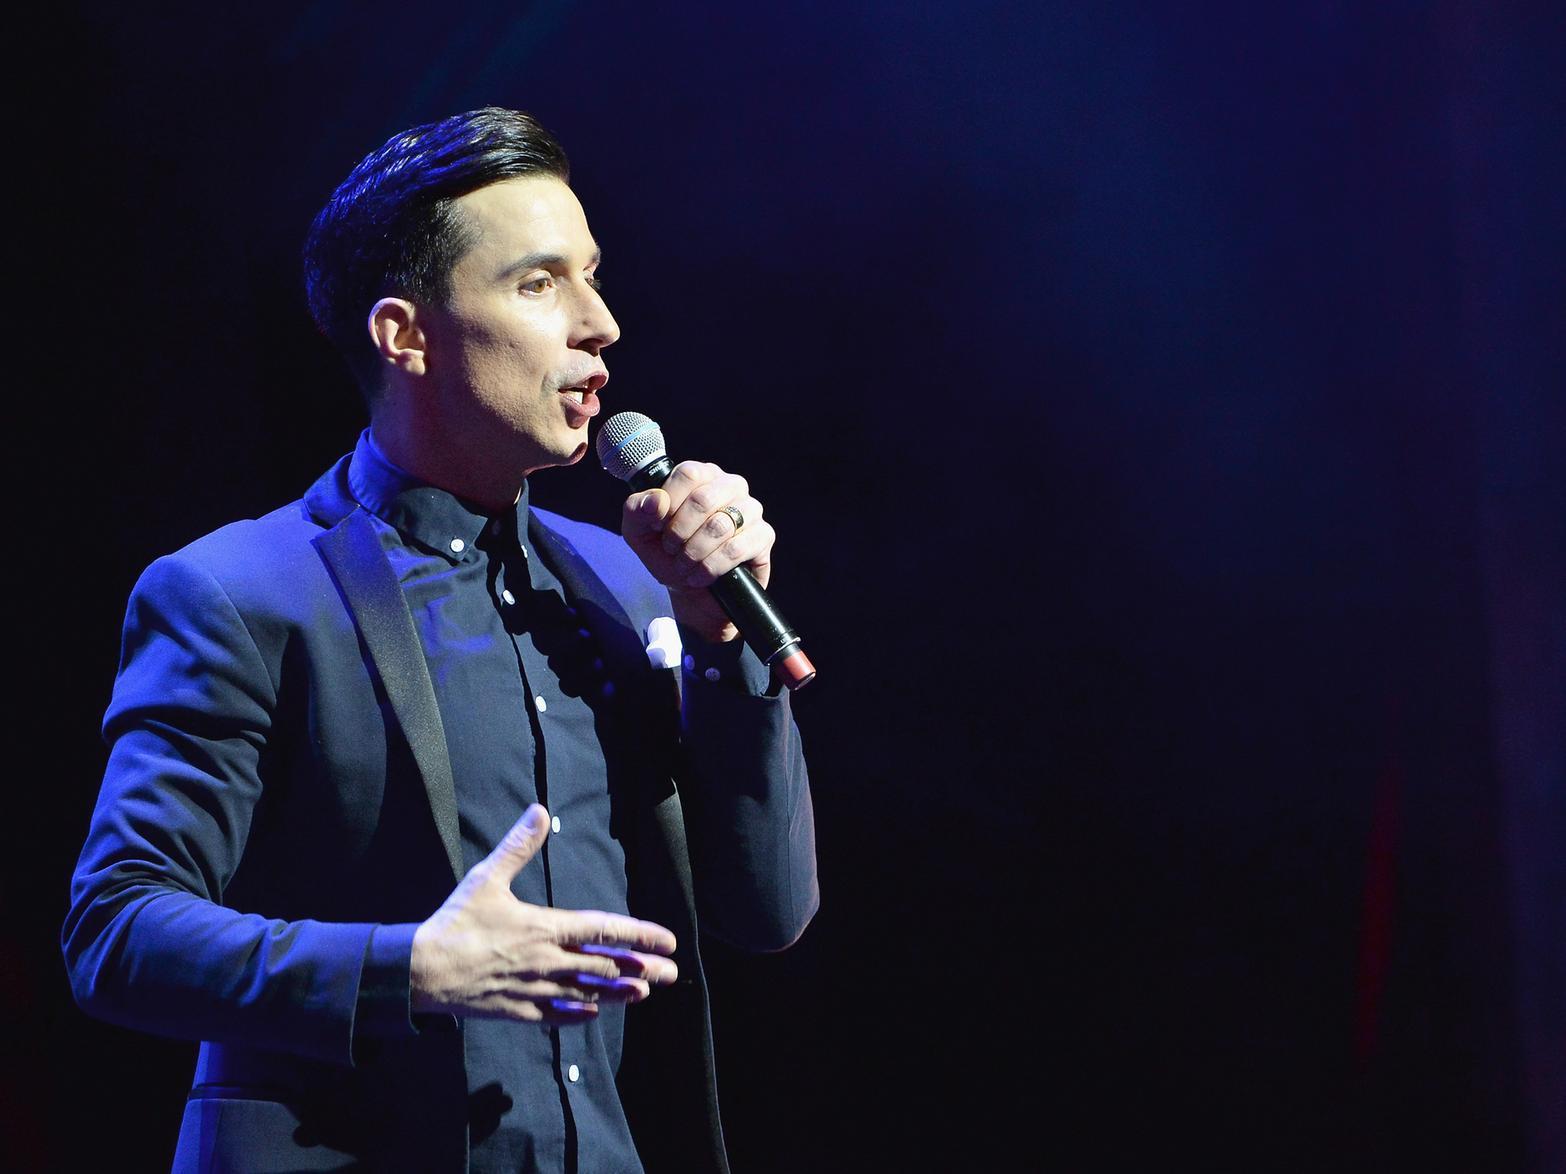 Day two of the festival on May 2, 2020 will be hosted by Russell Kane, who is best known for his hit BBC Sounds podcast, Evil Genius.